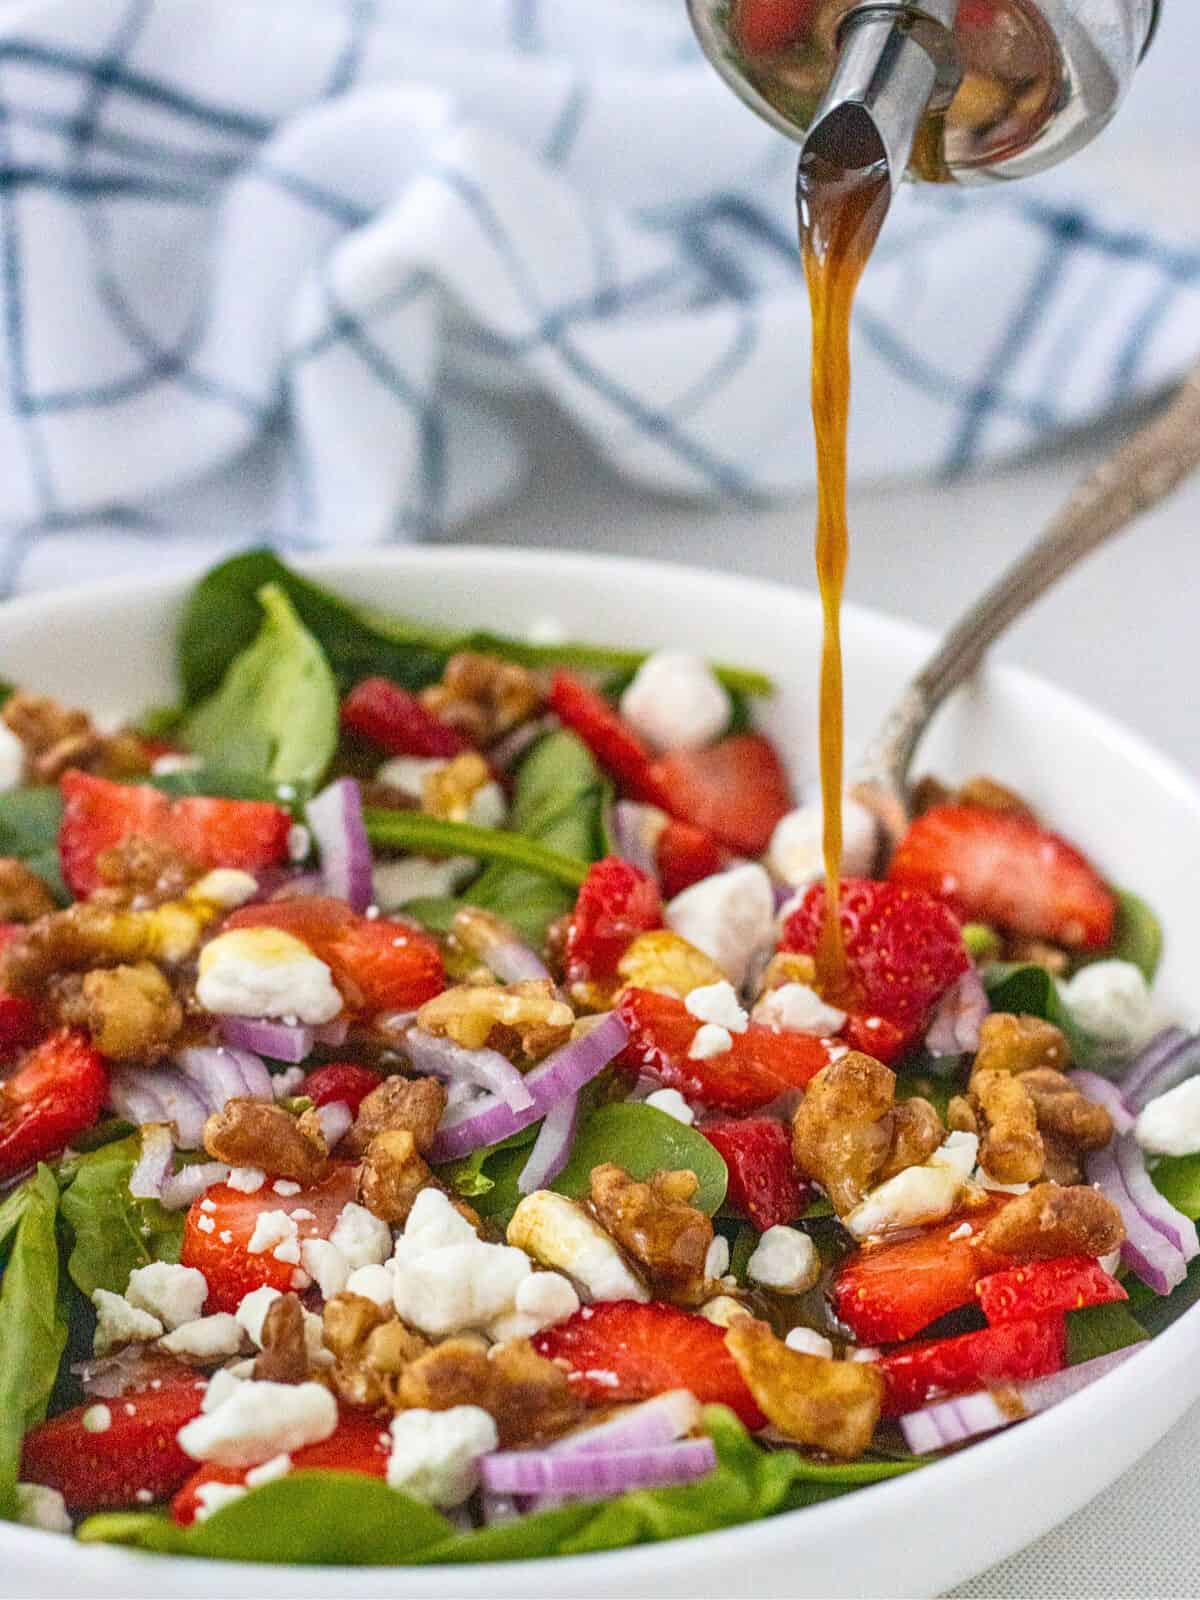 Balsamic dressing being poured over strawberry goat cheese salad.